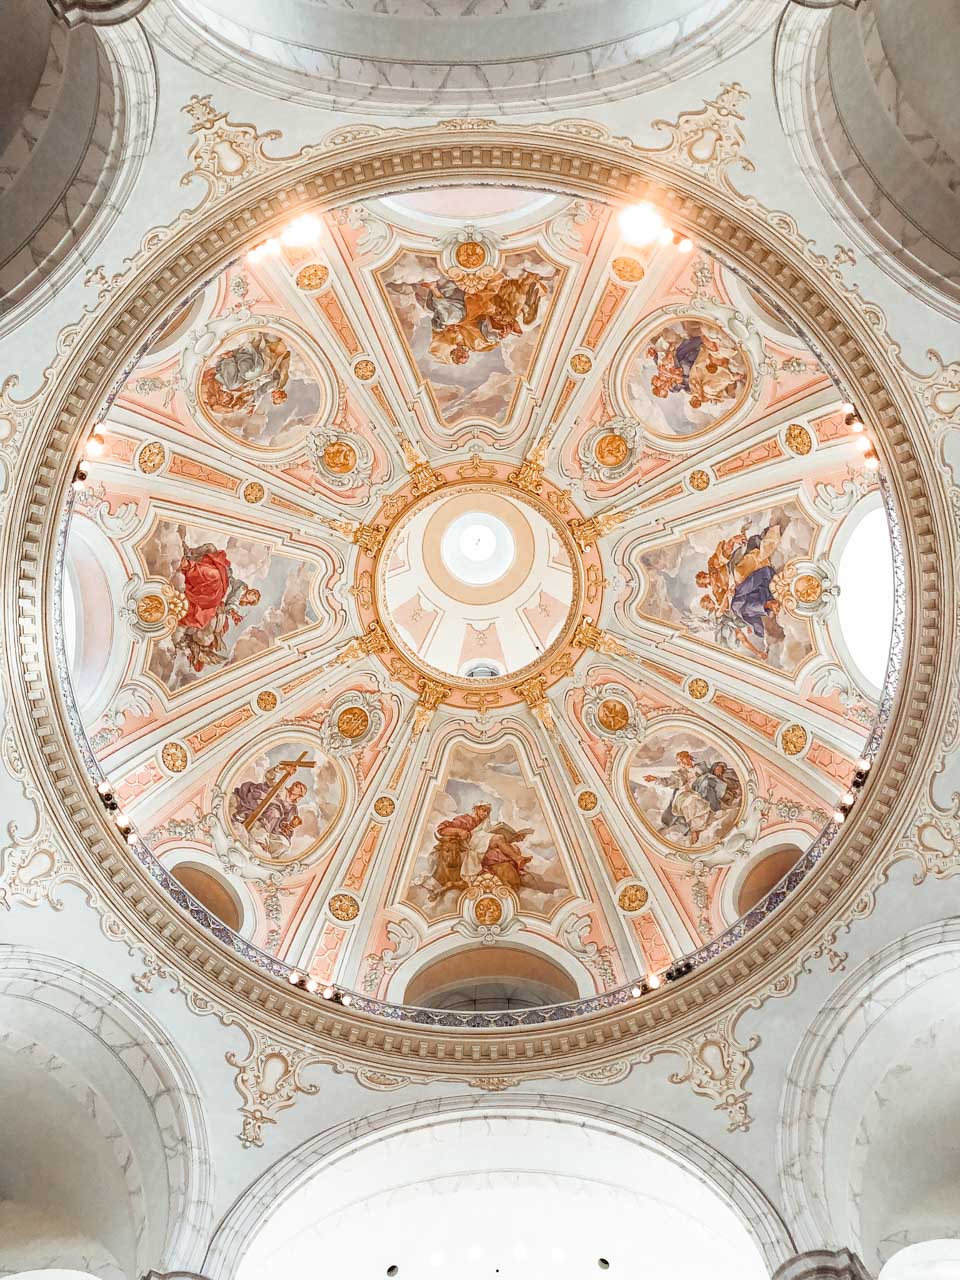 The dome of the Frauenkirche in Dresden, Germany seen from below